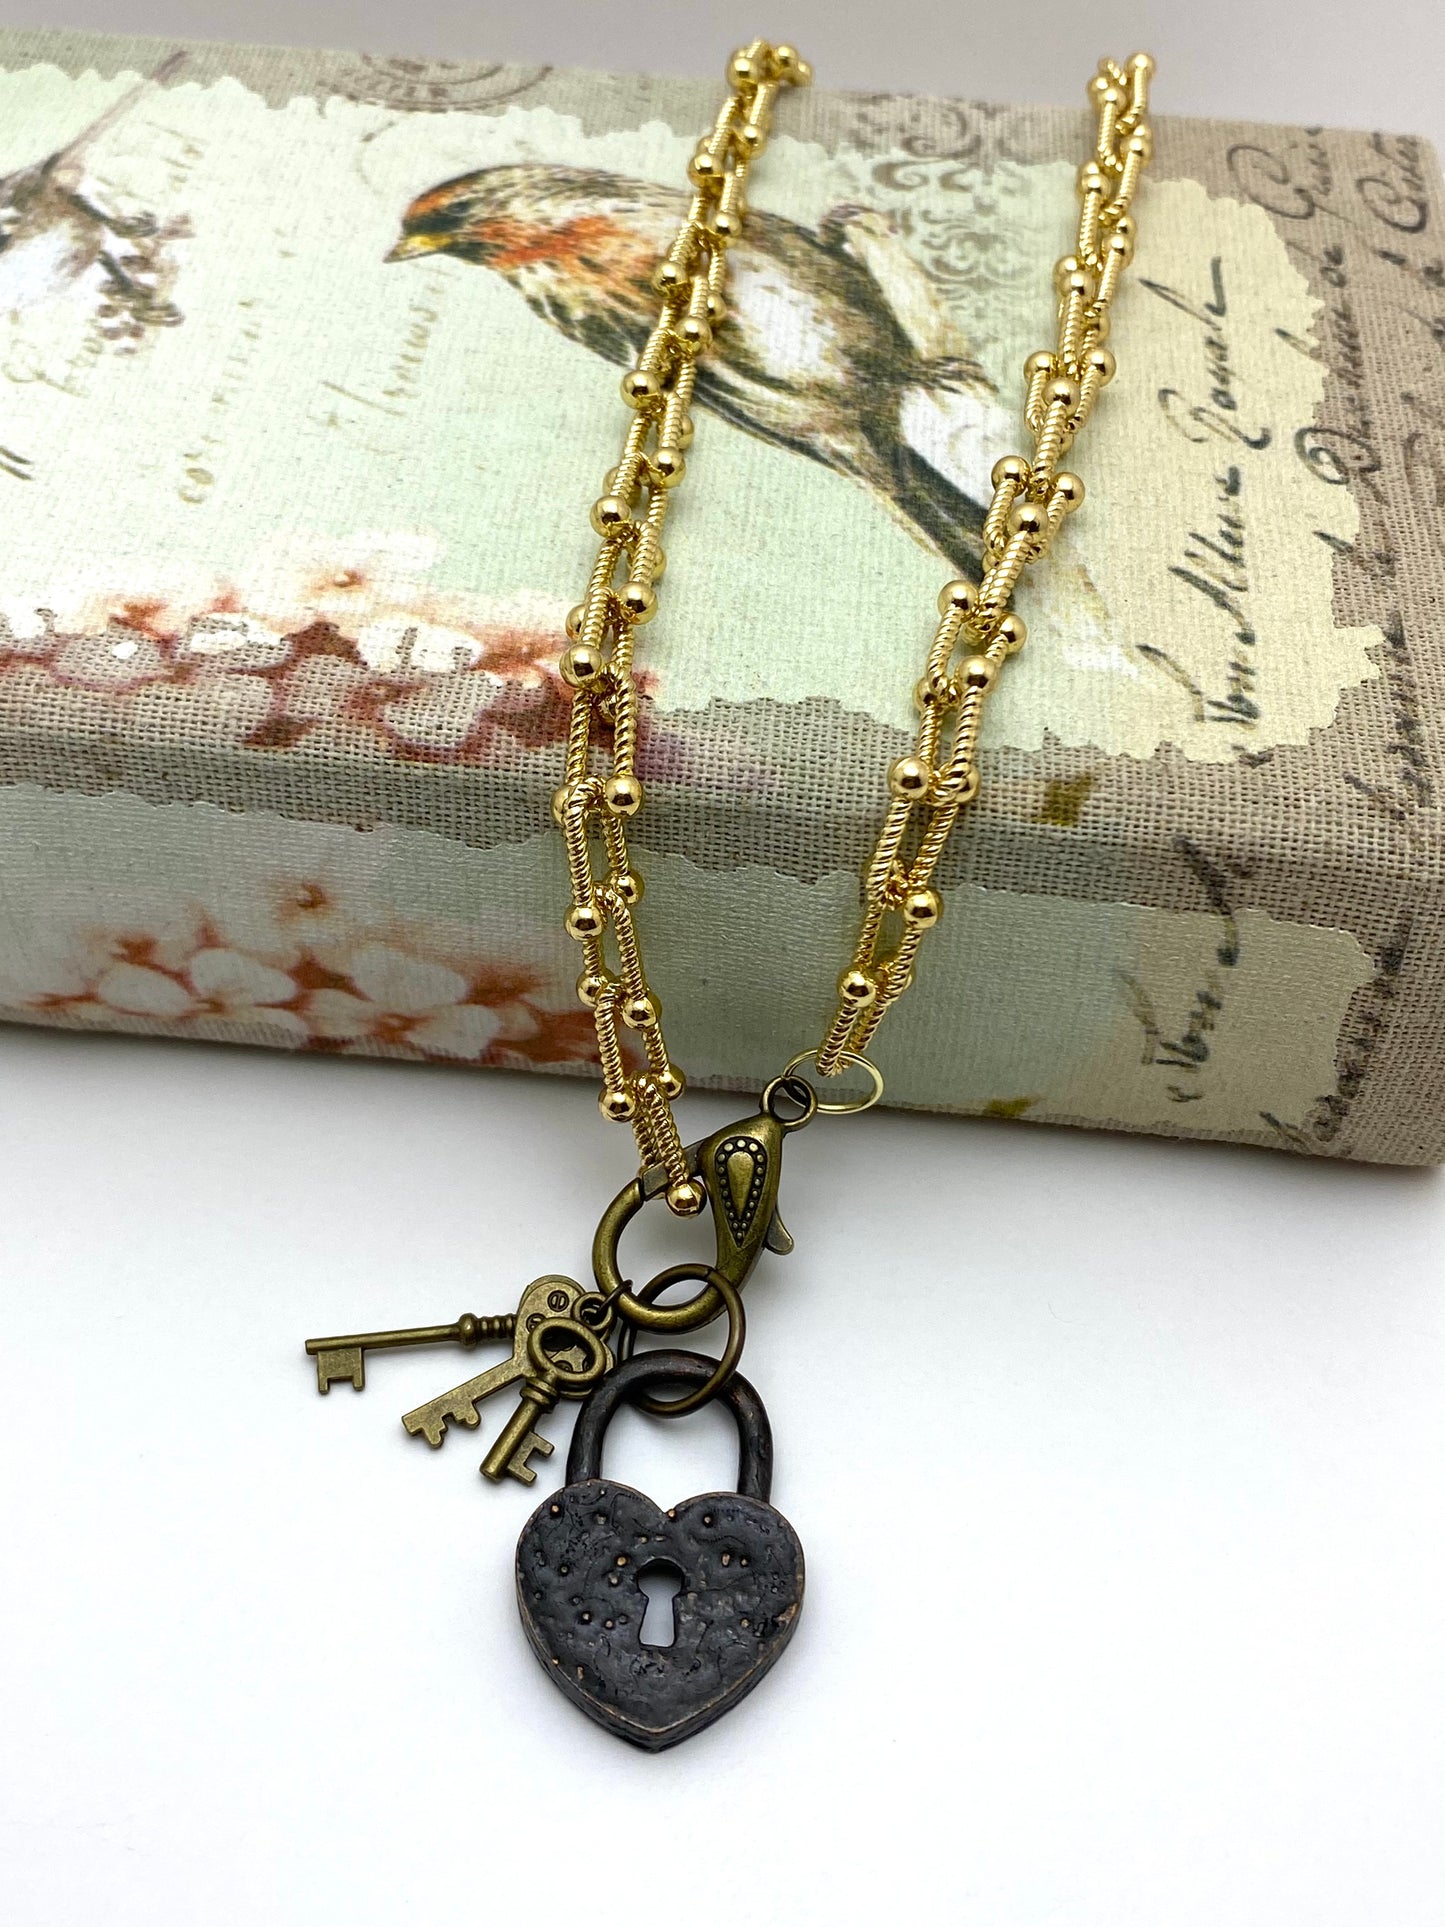 Jewelry, Gold Lock And Key Necklace